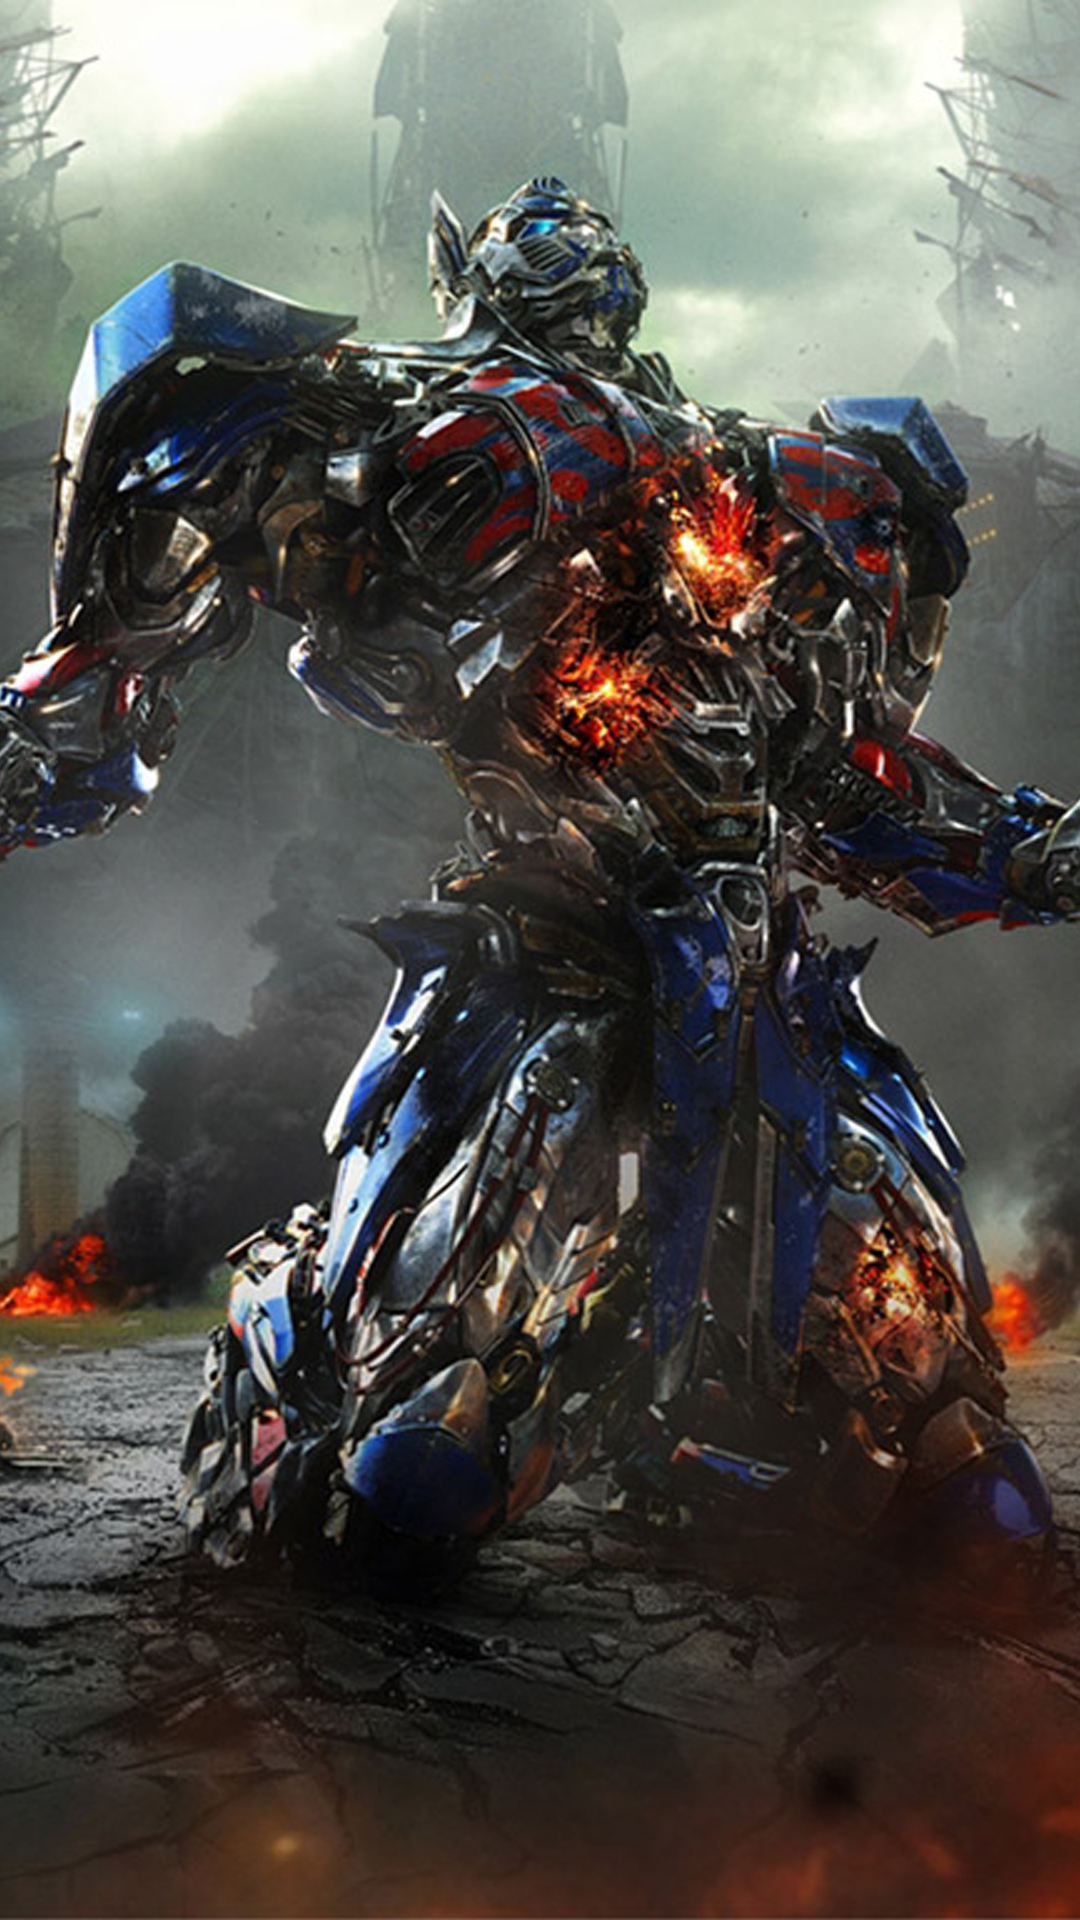 Transformers Optimus Prime Movie Android Wallpaper